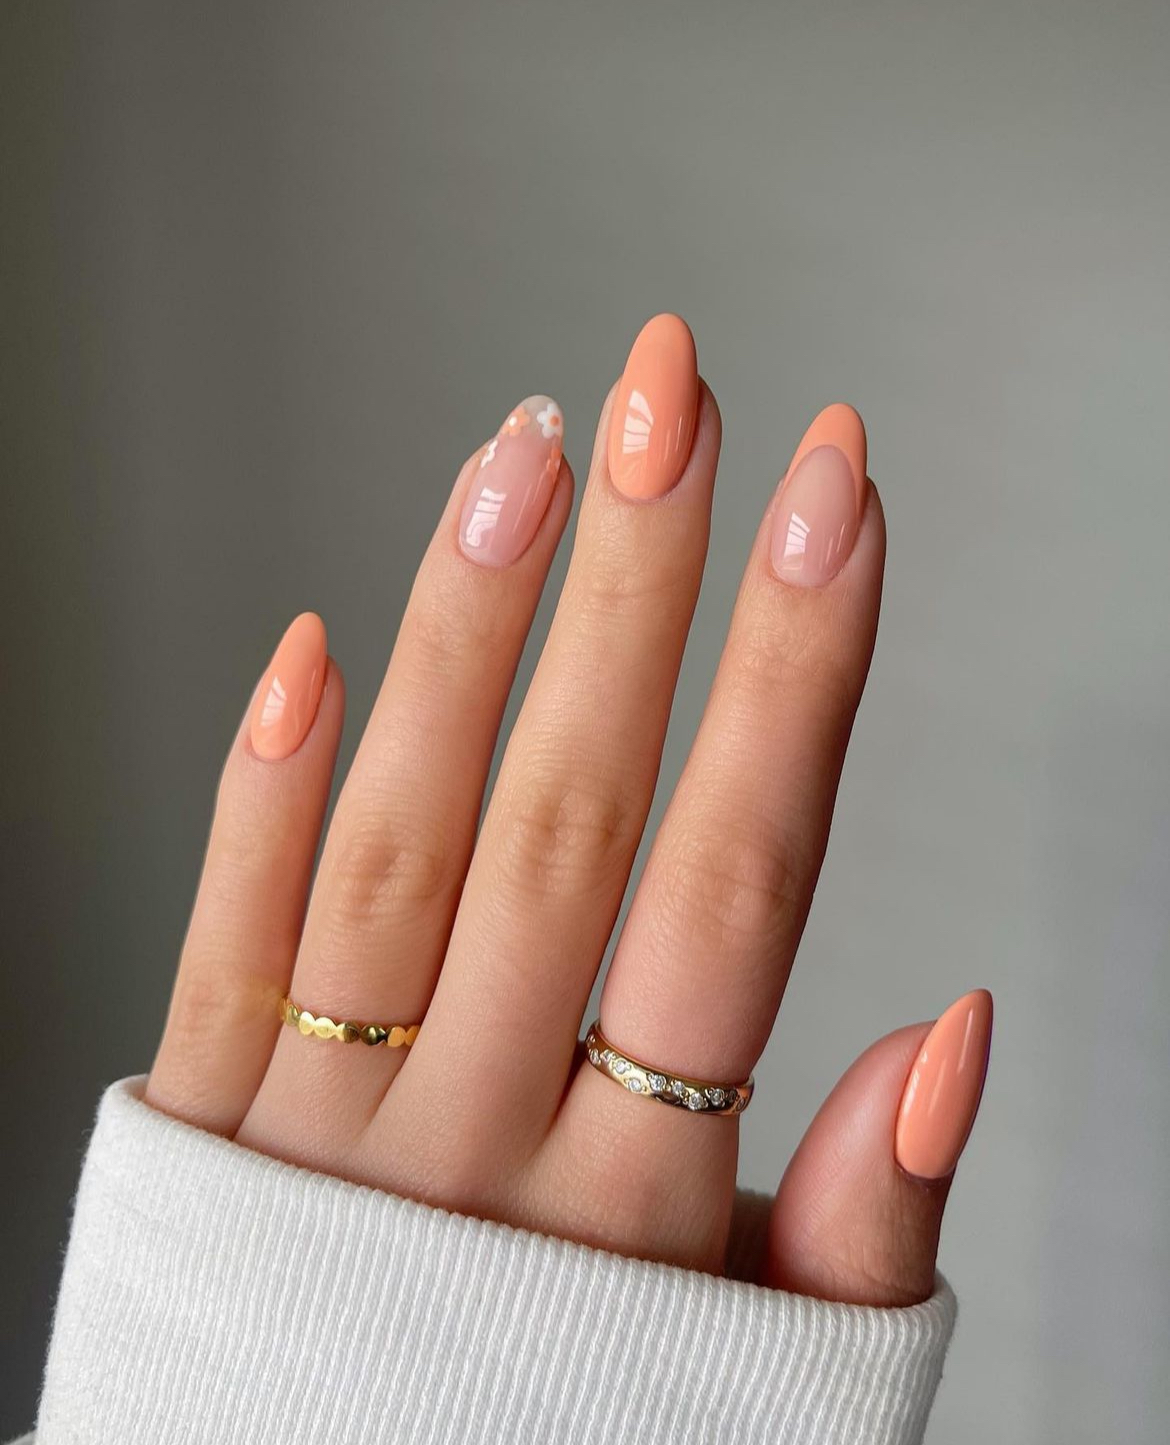 peach nails with designs